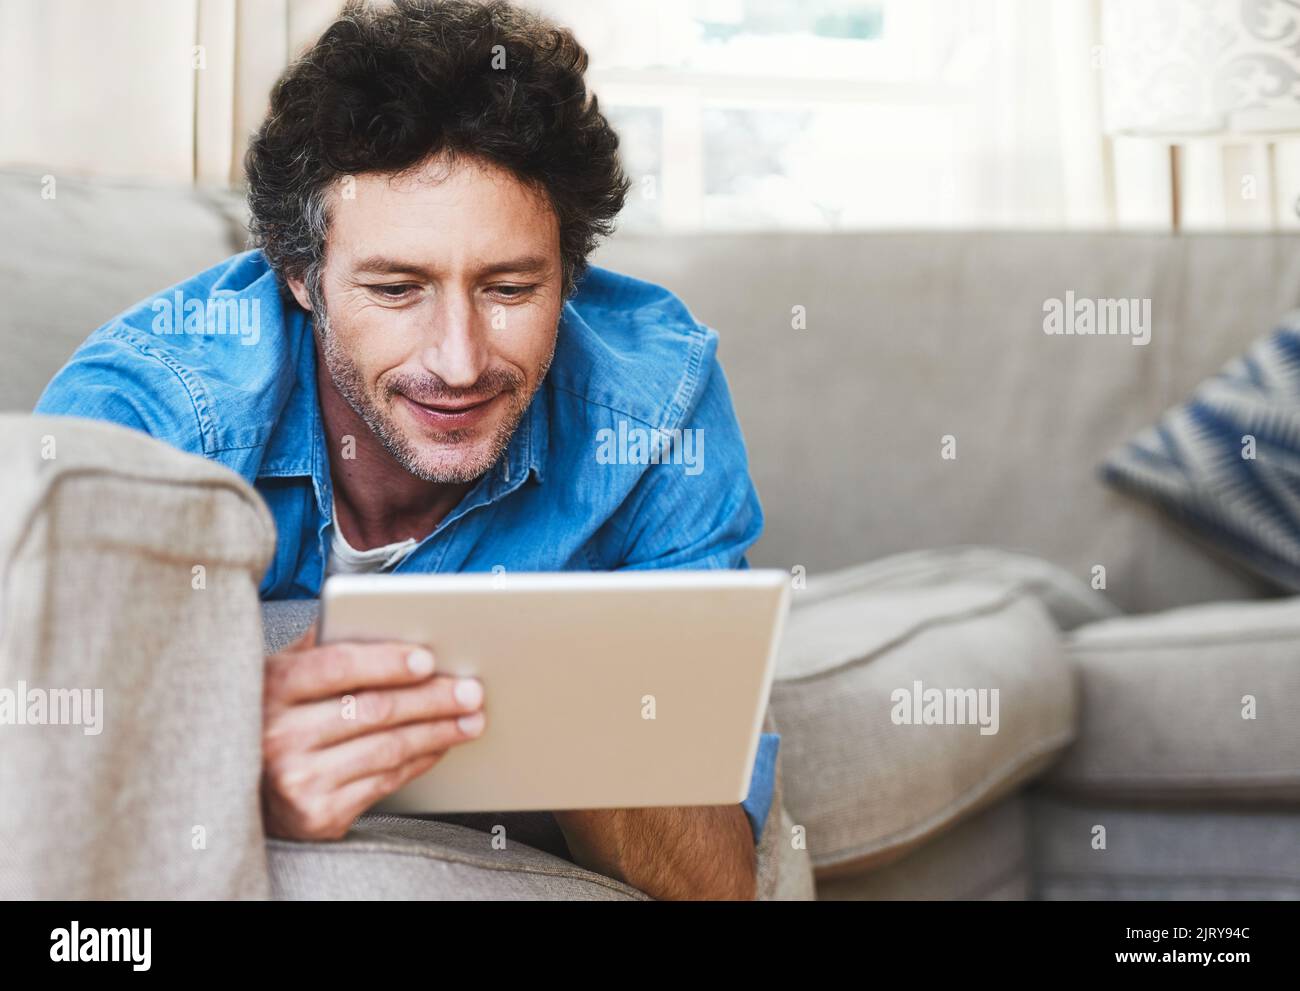 Seeing the world from the comfort of his couch. a bachelor relaxing on the sofa with his tablet. Stock Photo